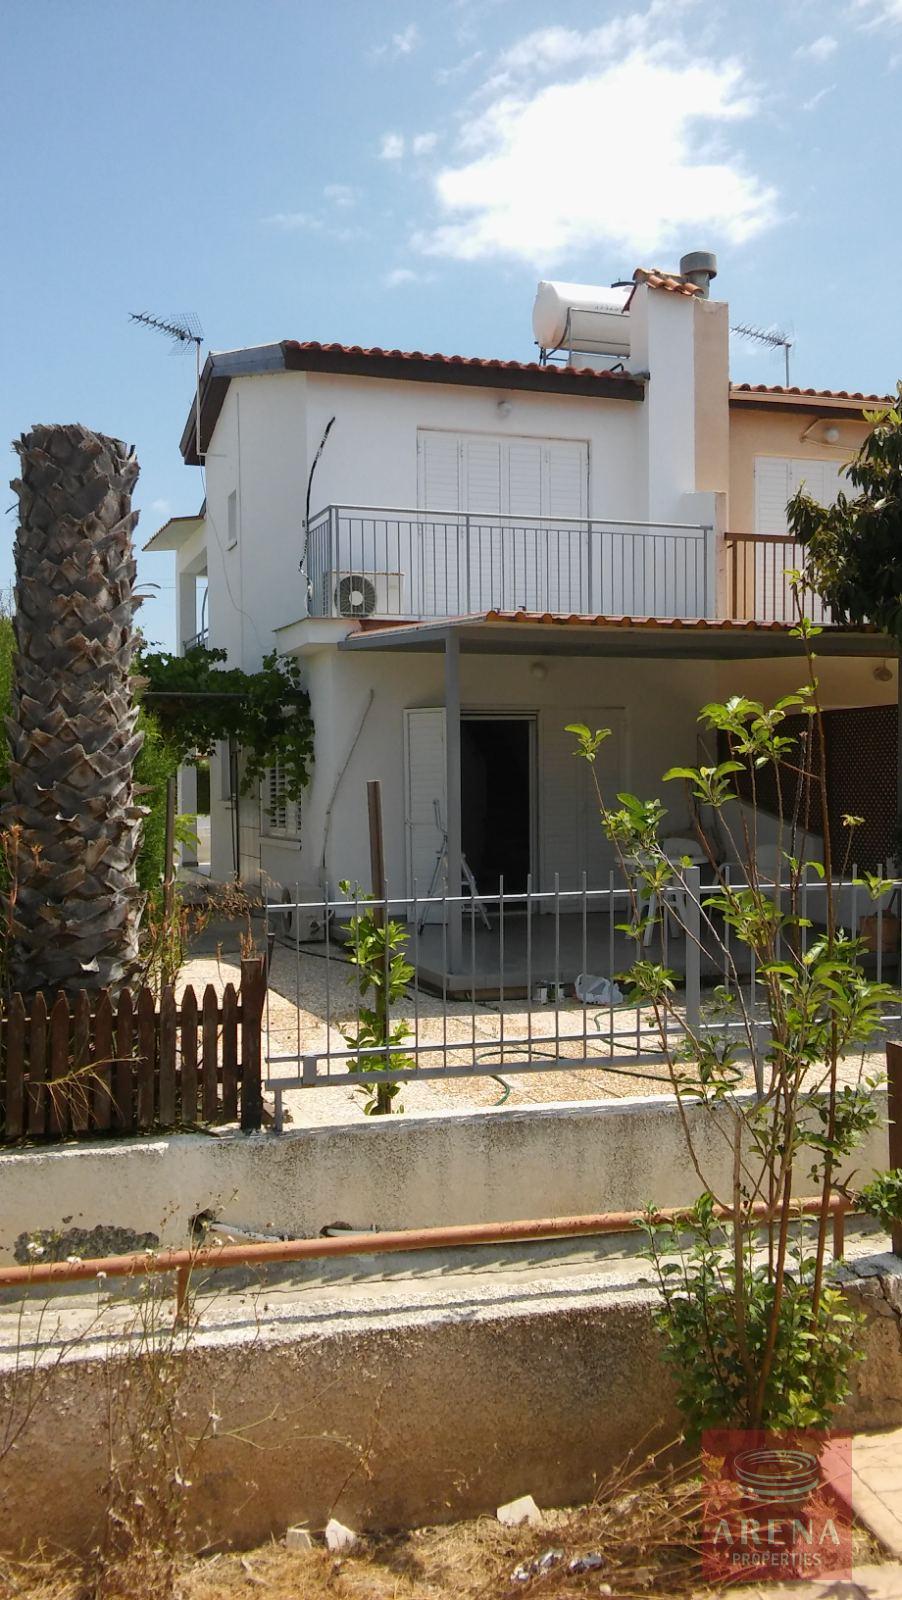 1 house for rent pervolia 5472 0